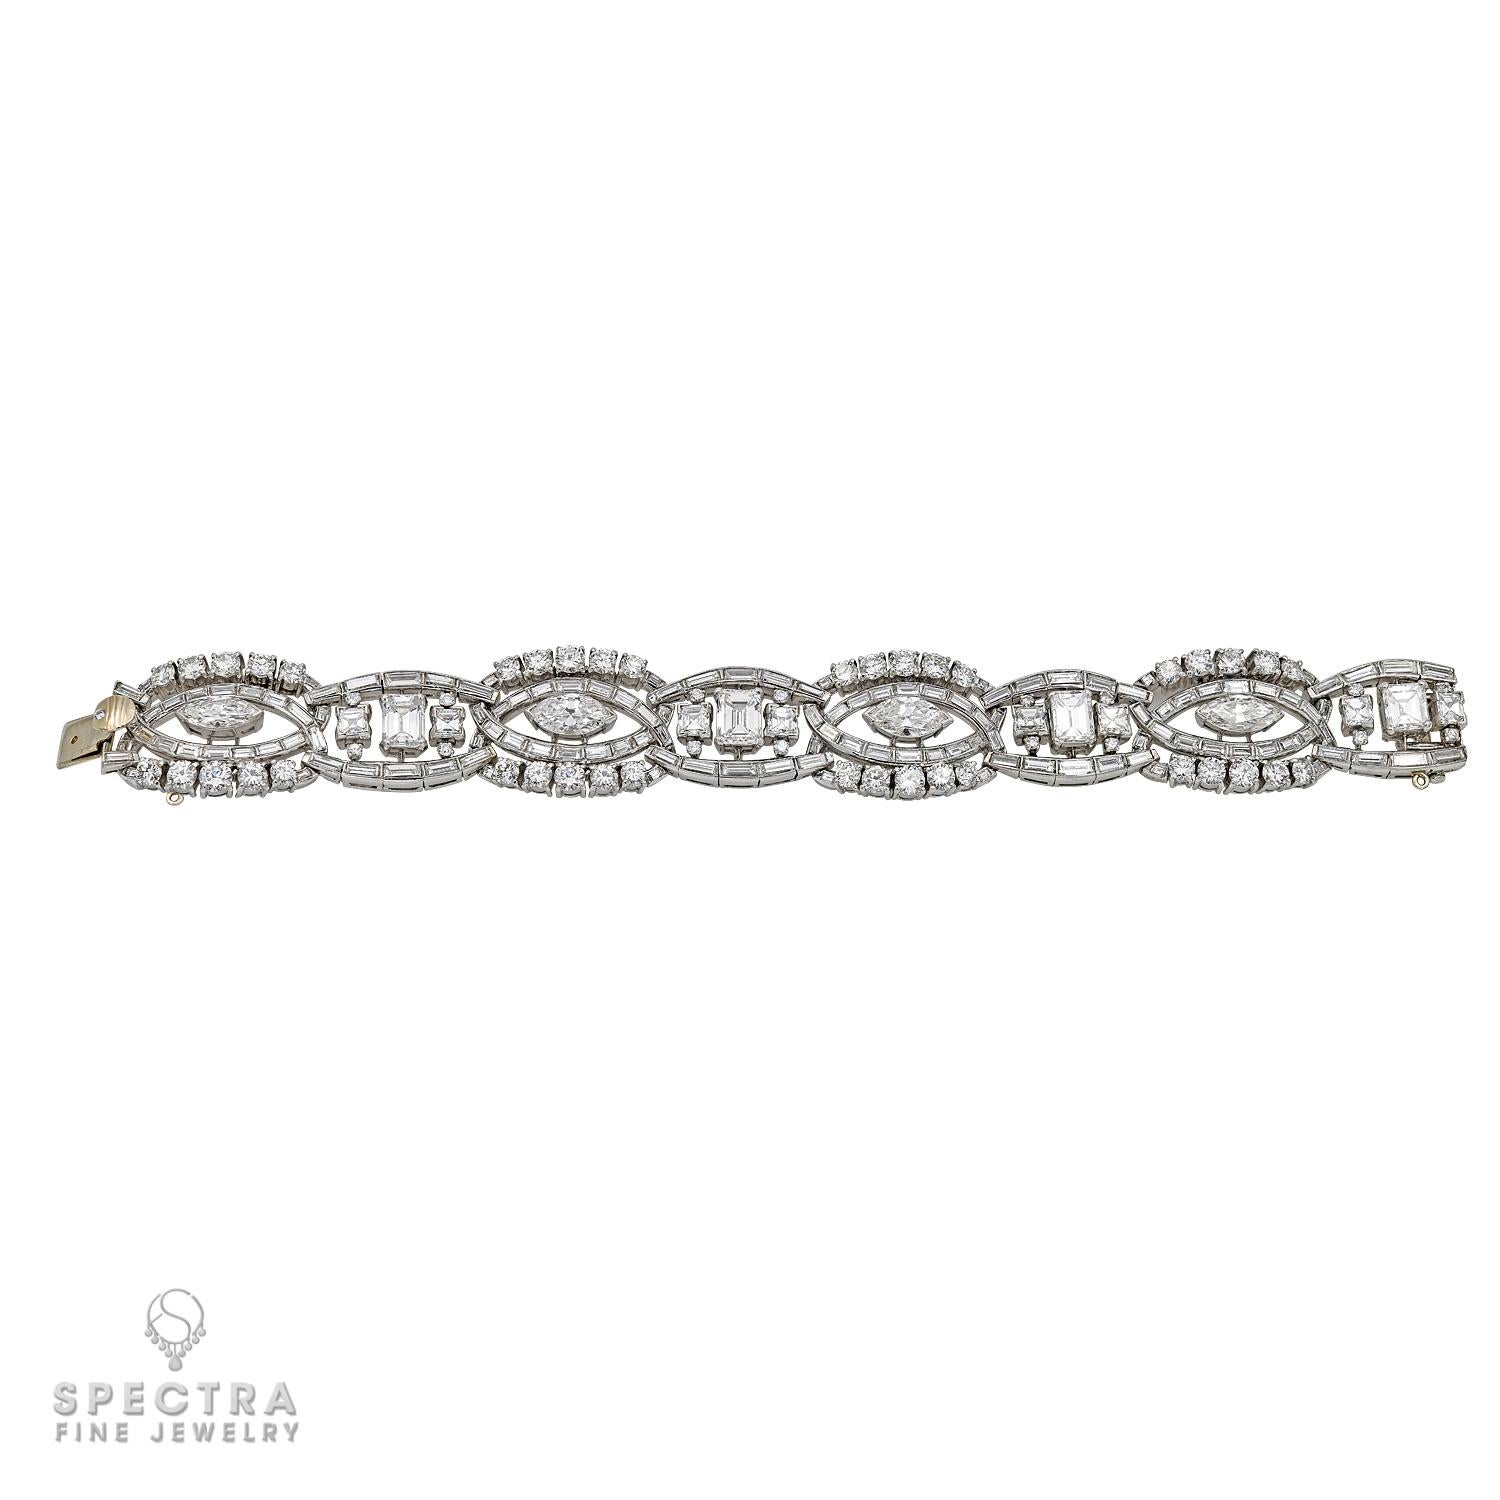 When baguette diamonds—those linear, sleek, rectangular fancy cut stones that reached their height of popularity in the 1920s—are used to deftly drive the dynamic movement within a jewelry composition, it borders on pure poetry. This Vintage Diamond